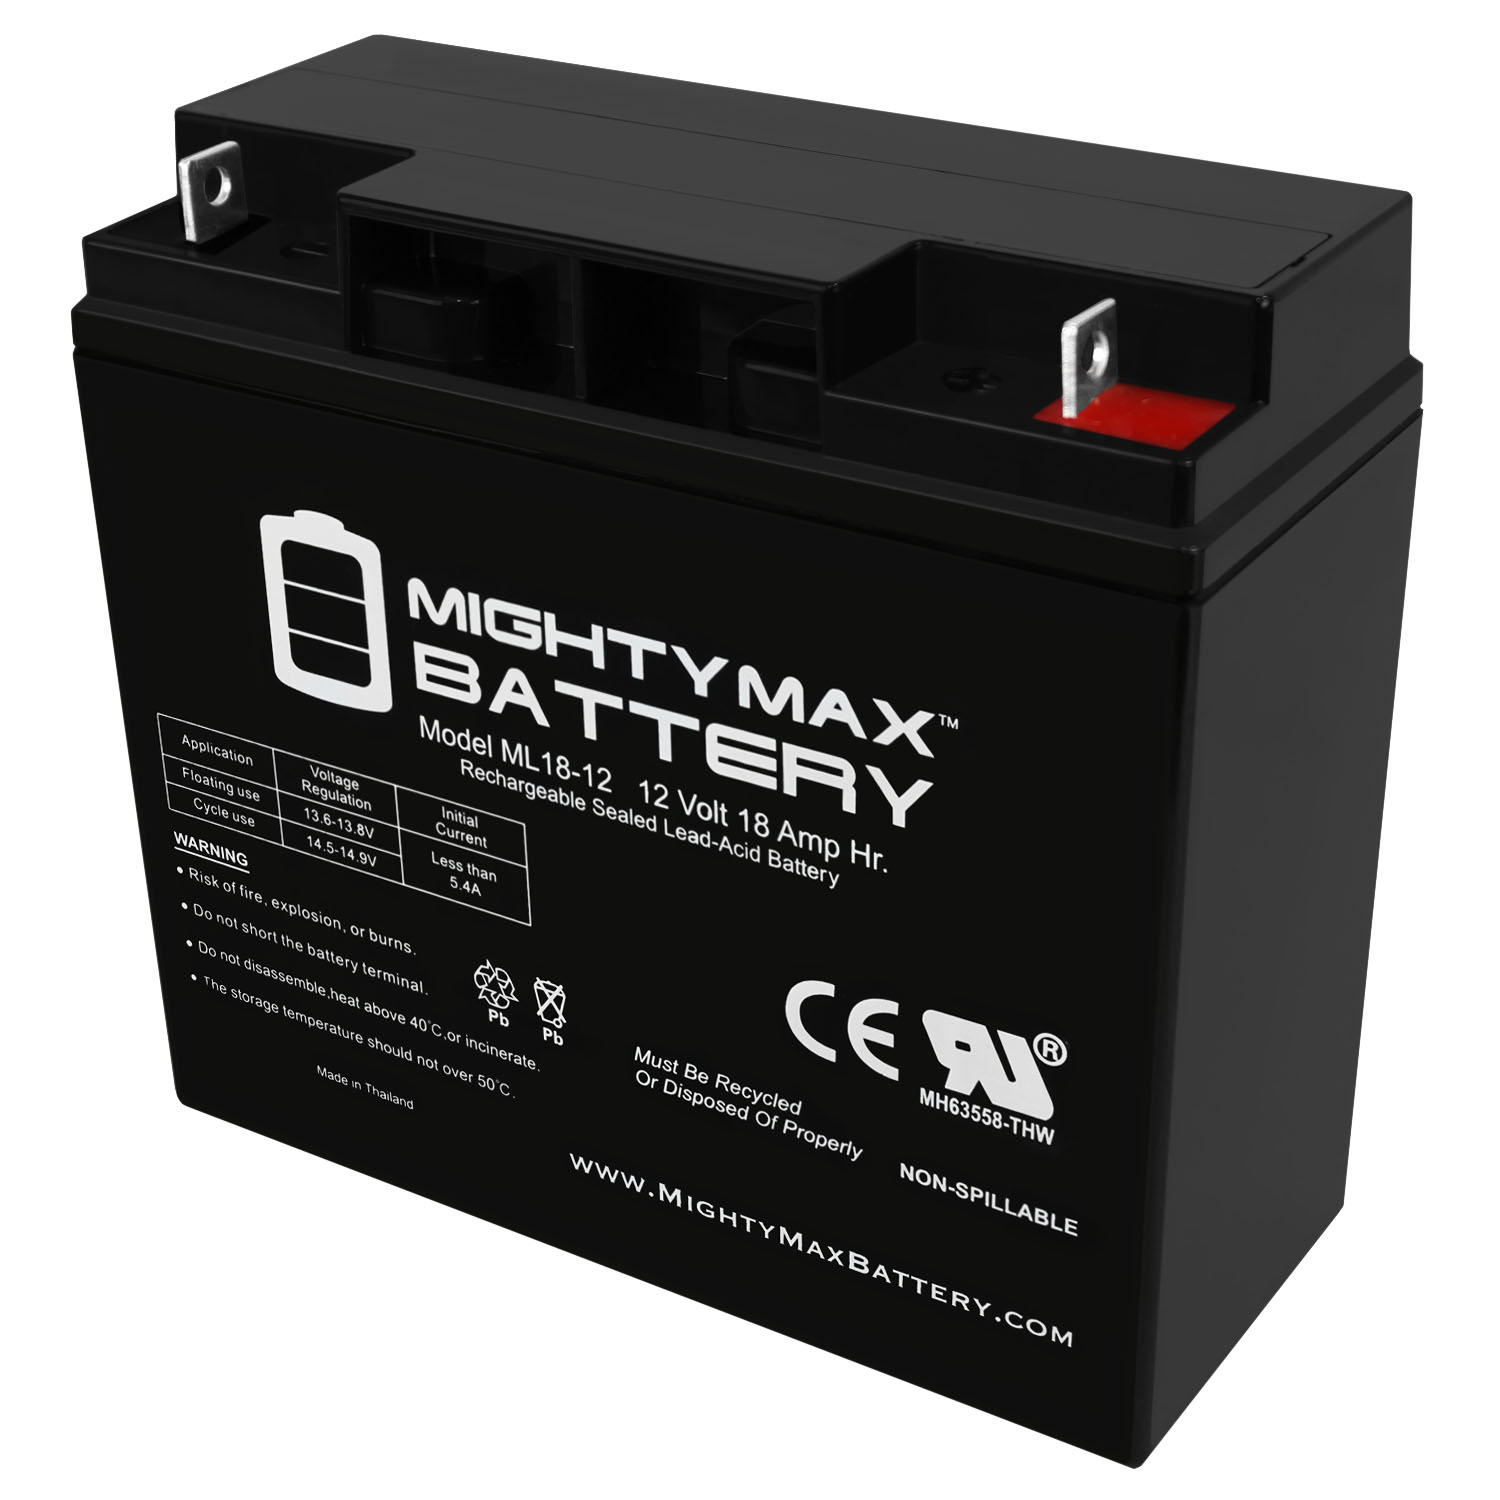 12V 18AH Sealed Lead Acid Battery Replacement For FM12180 - MightyMaxBattery